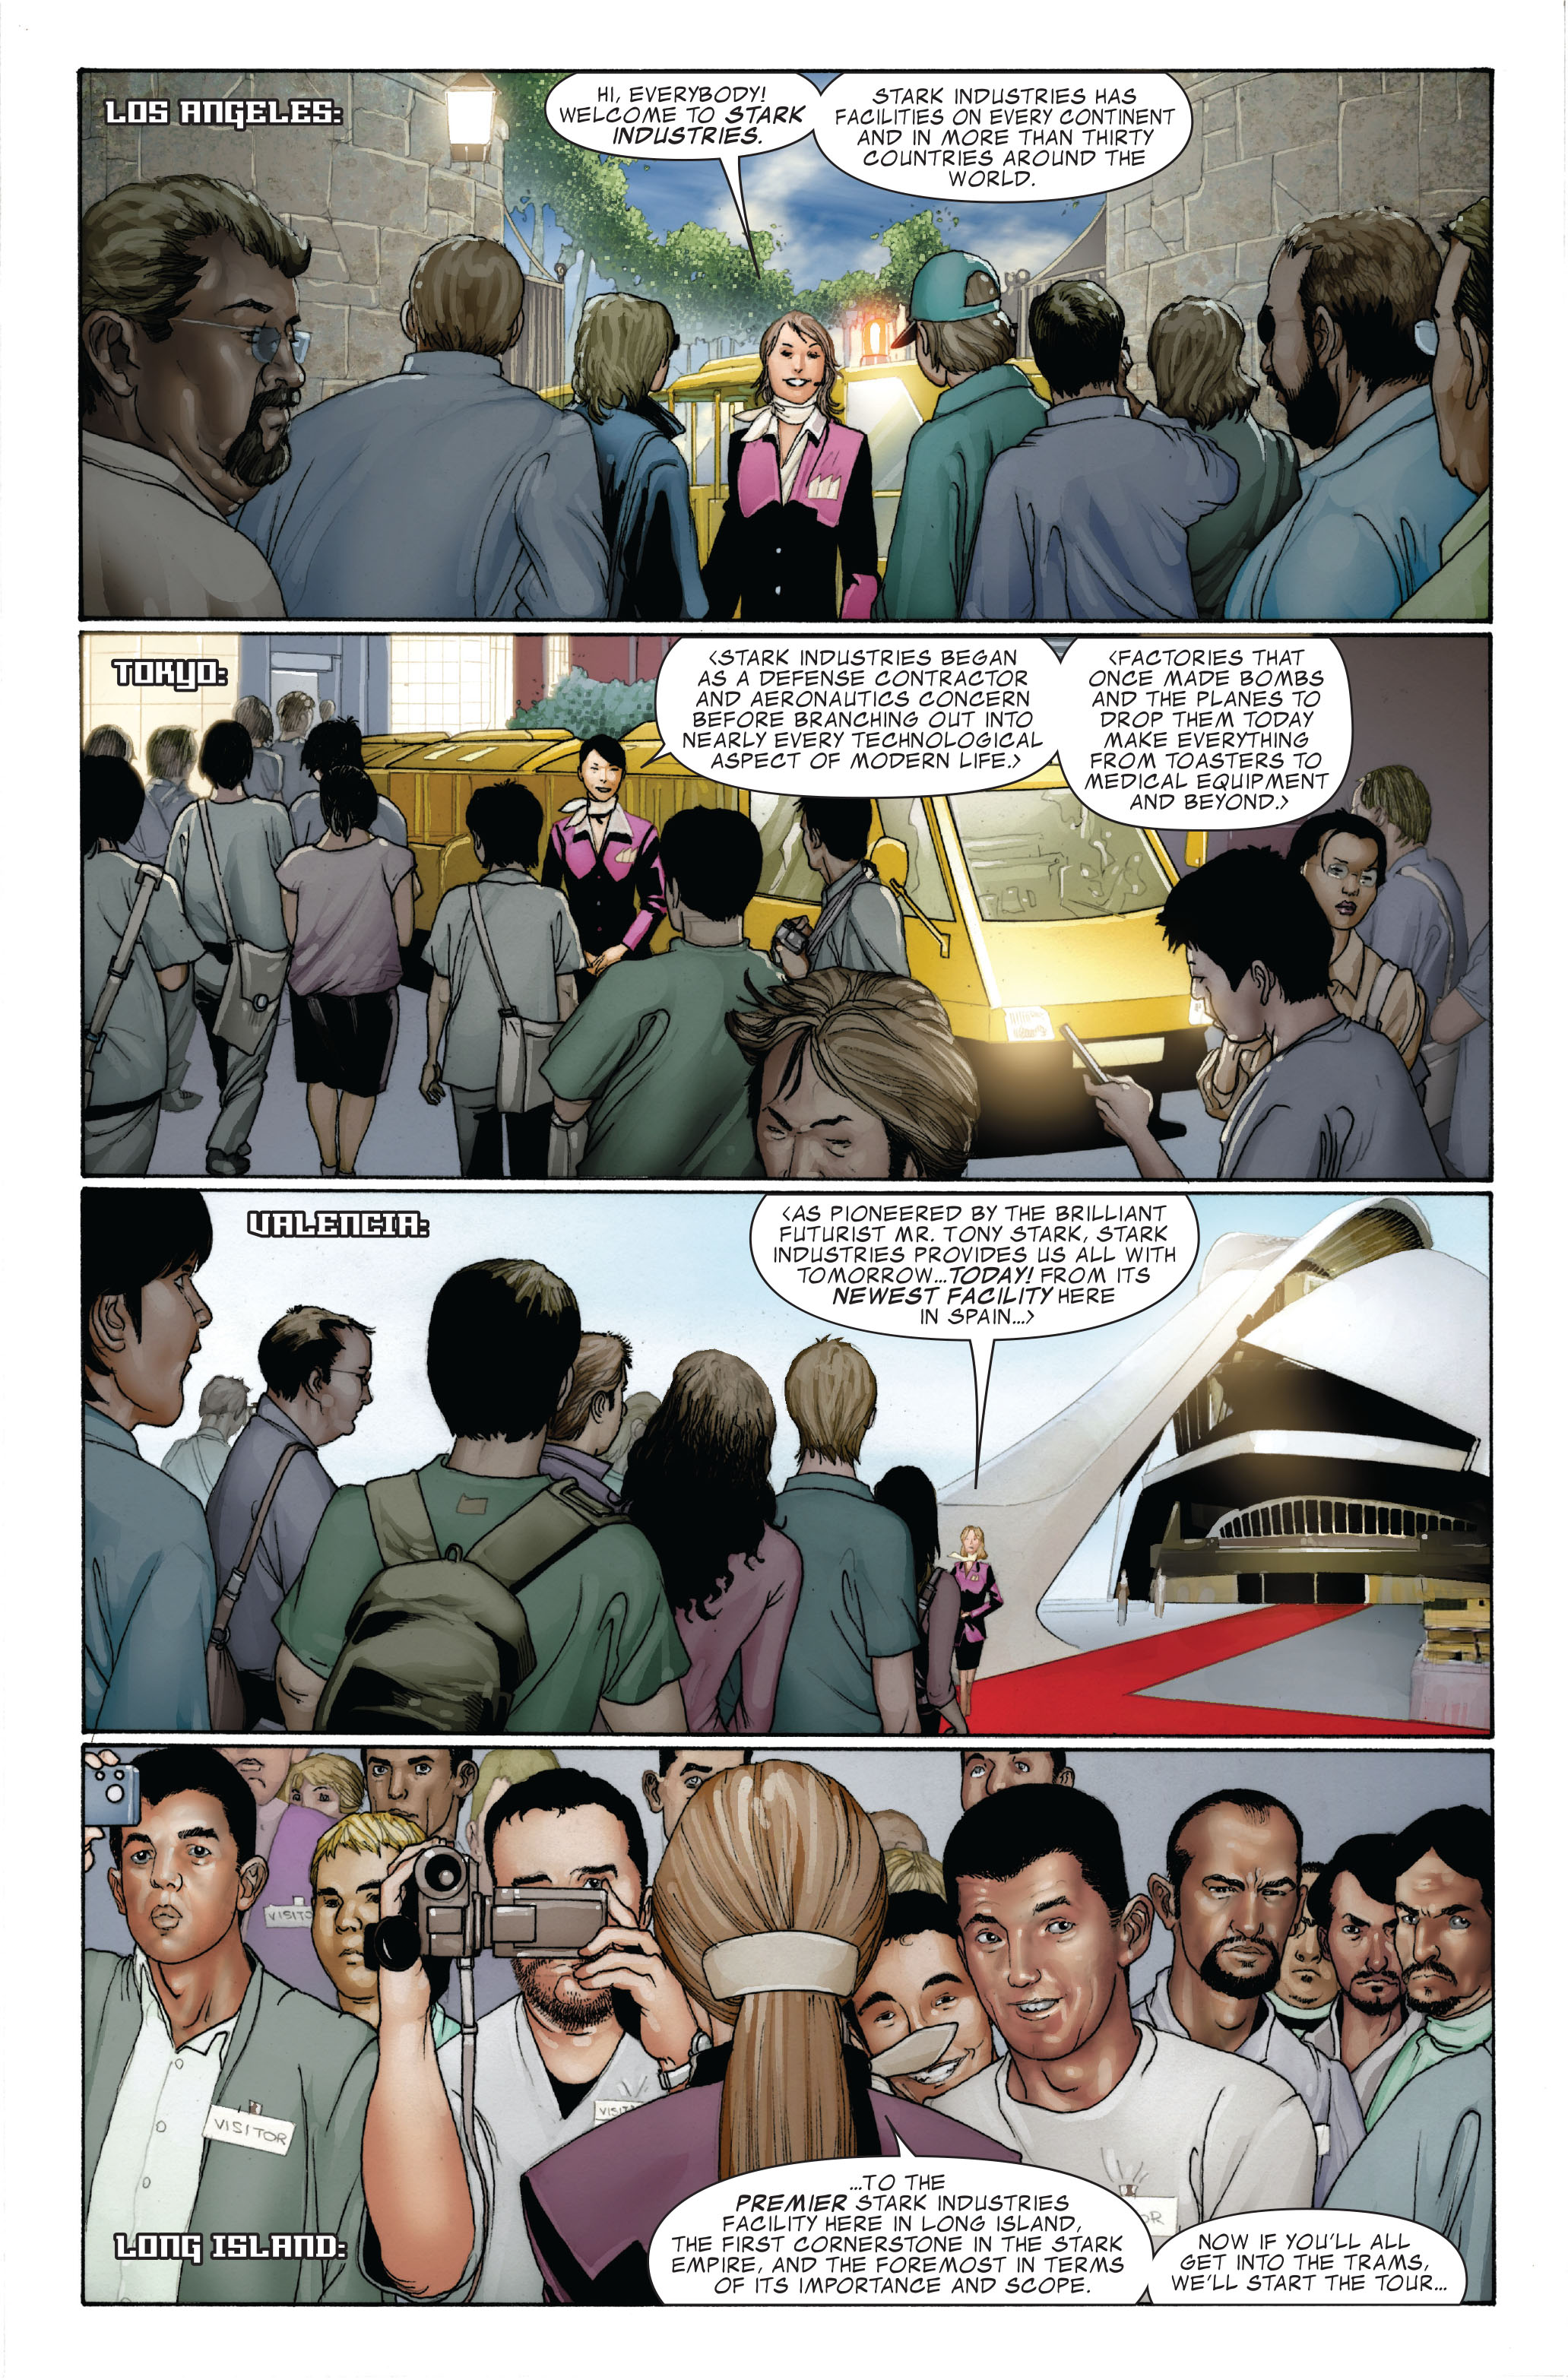 Invincible Iron Man (2008) 5 Page 1